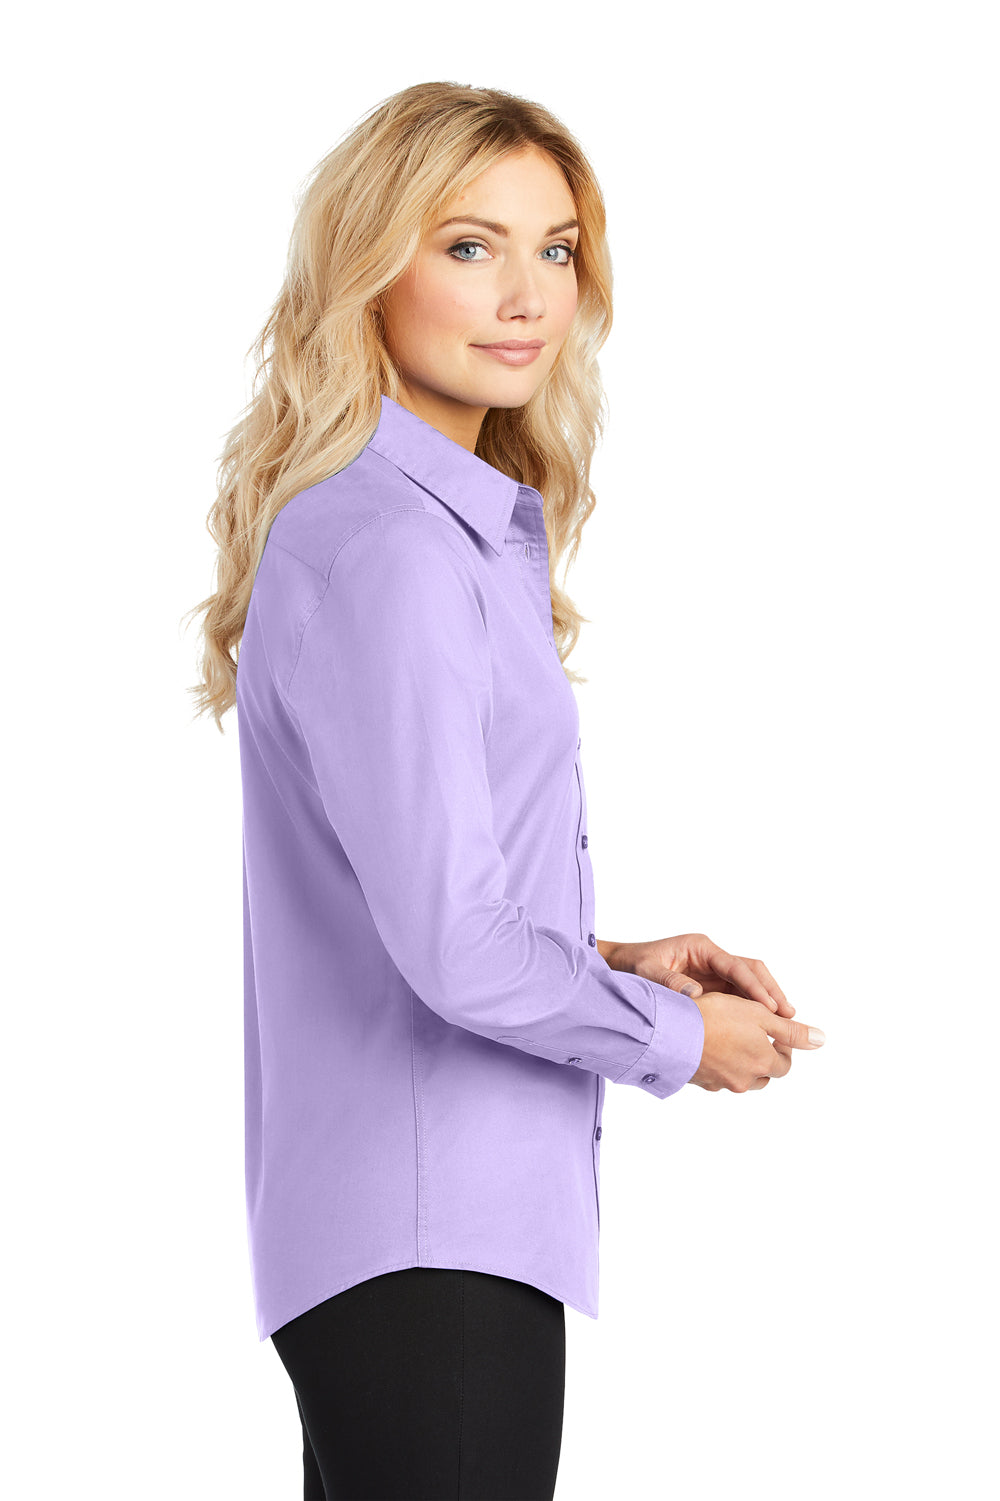 Port Authority L608 Womens Easy Care Wrinkle Resistant Long Sleeve Button Down Shirt Bright Lavender Purple Side